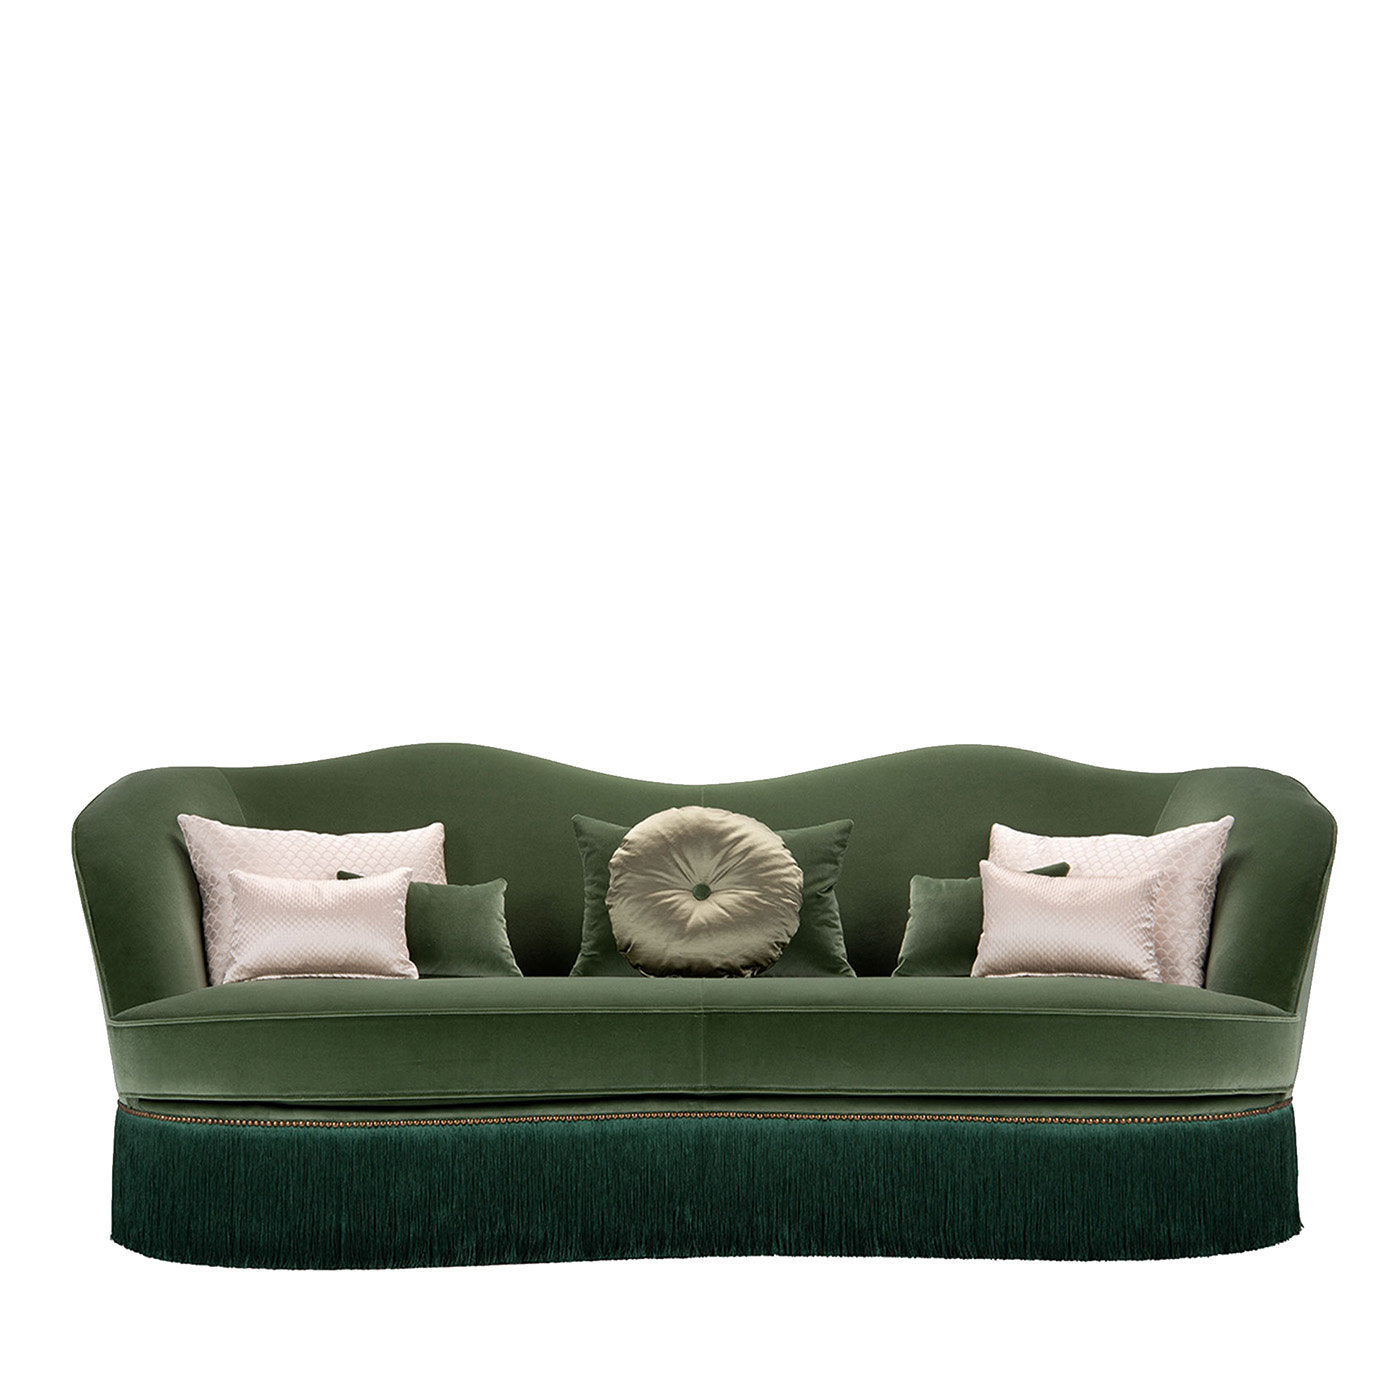 Dione Green 3-Seater Sofa - Main view